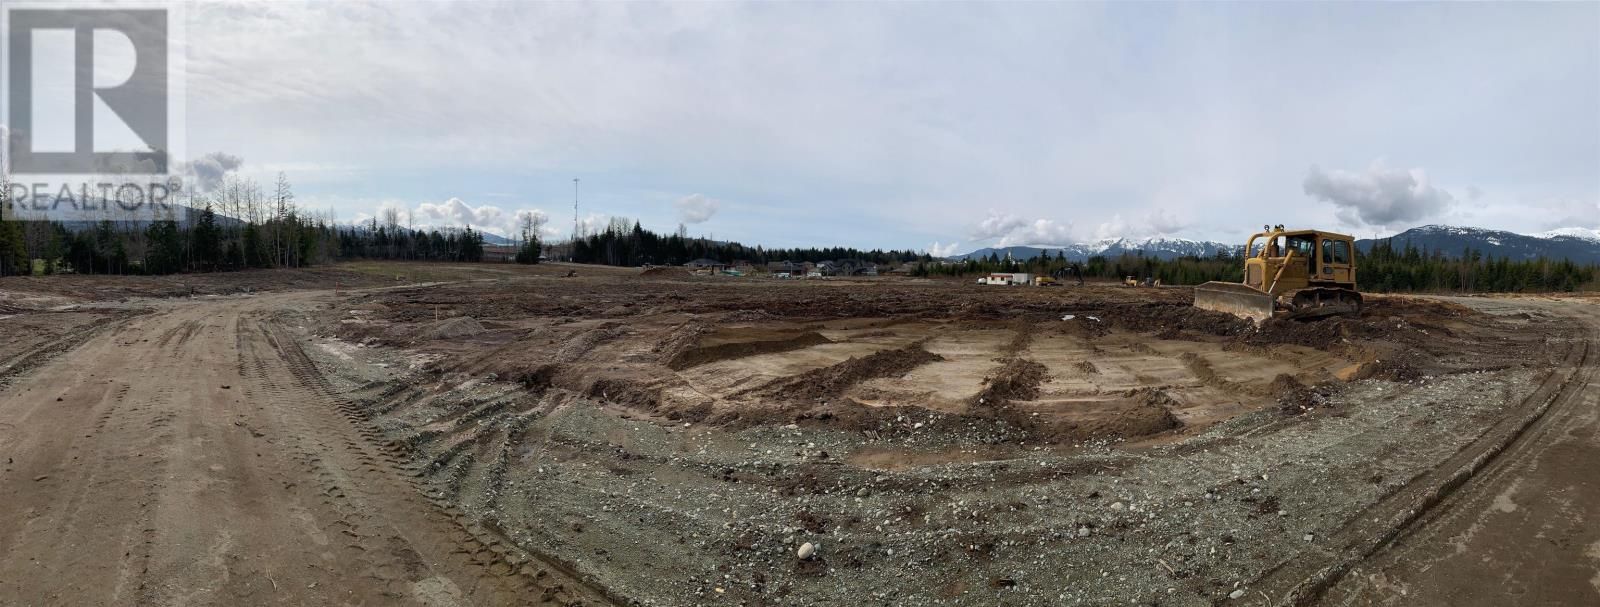 Main Photo: LOT A WAKITA AVENUE in Kitimat: Vacant Land for sale : MLS®# R2632305